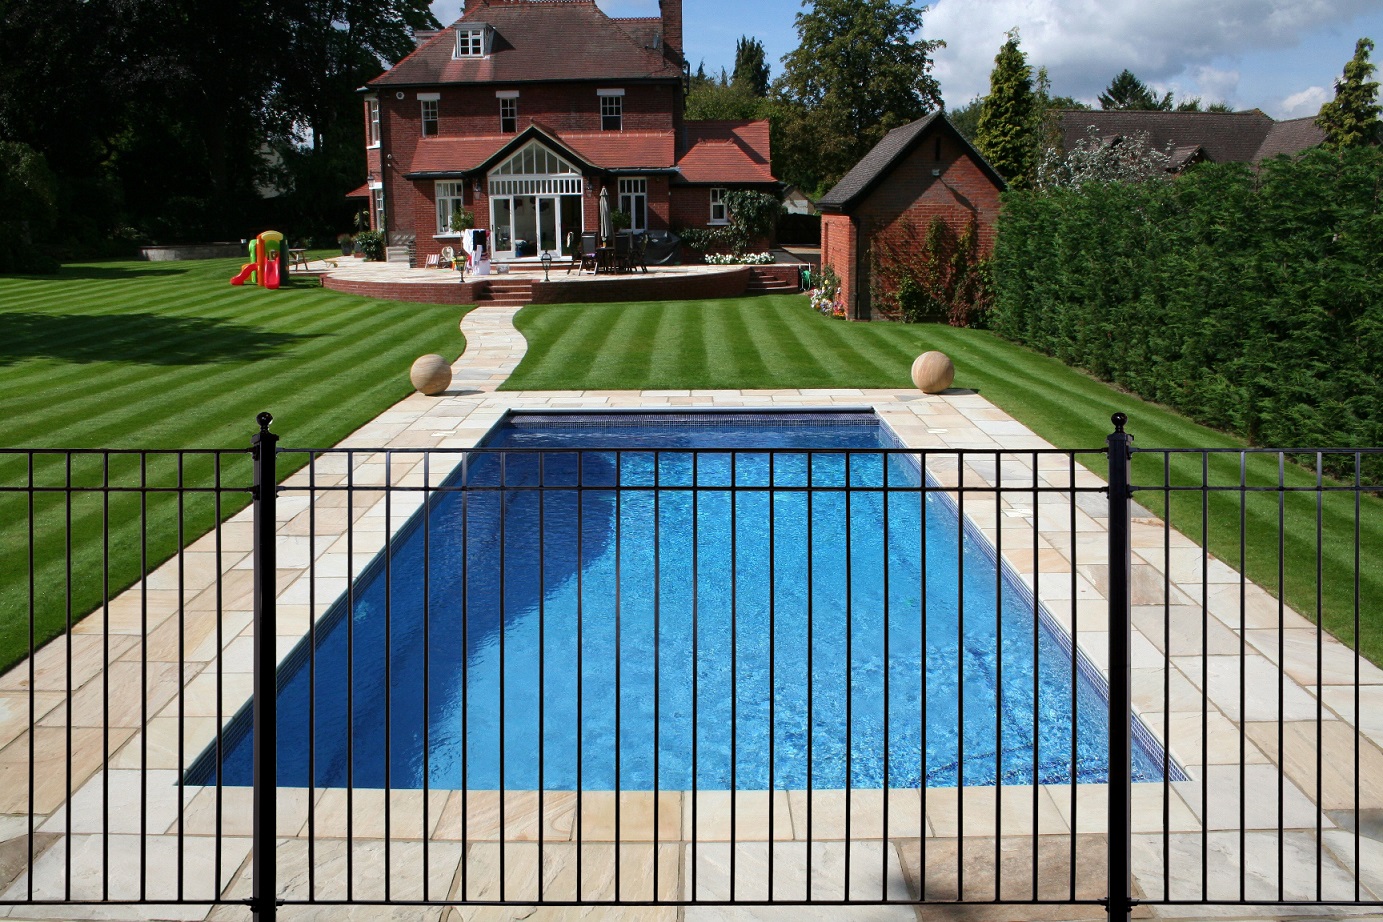 Royal Swimming Pool Design Ideas With ELegance Shape Amazing Fence Block Floortile Green Plant Grass Desig Exterior Home For Modern Concept Exterior Pool Ideas Pool Design